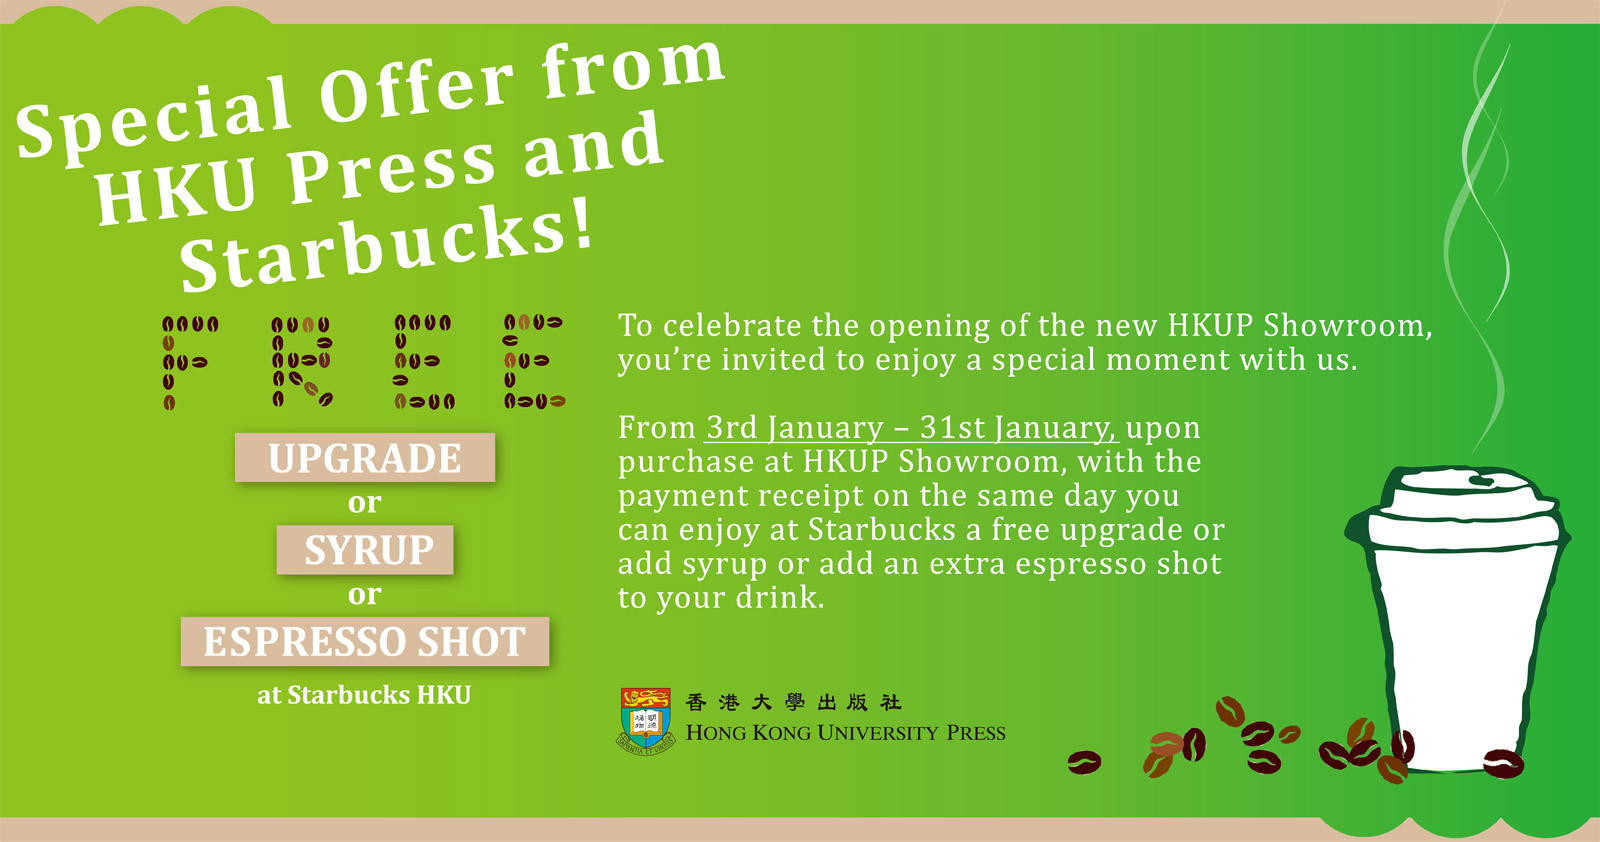 Special Offer from HKU Press and Starbucks!